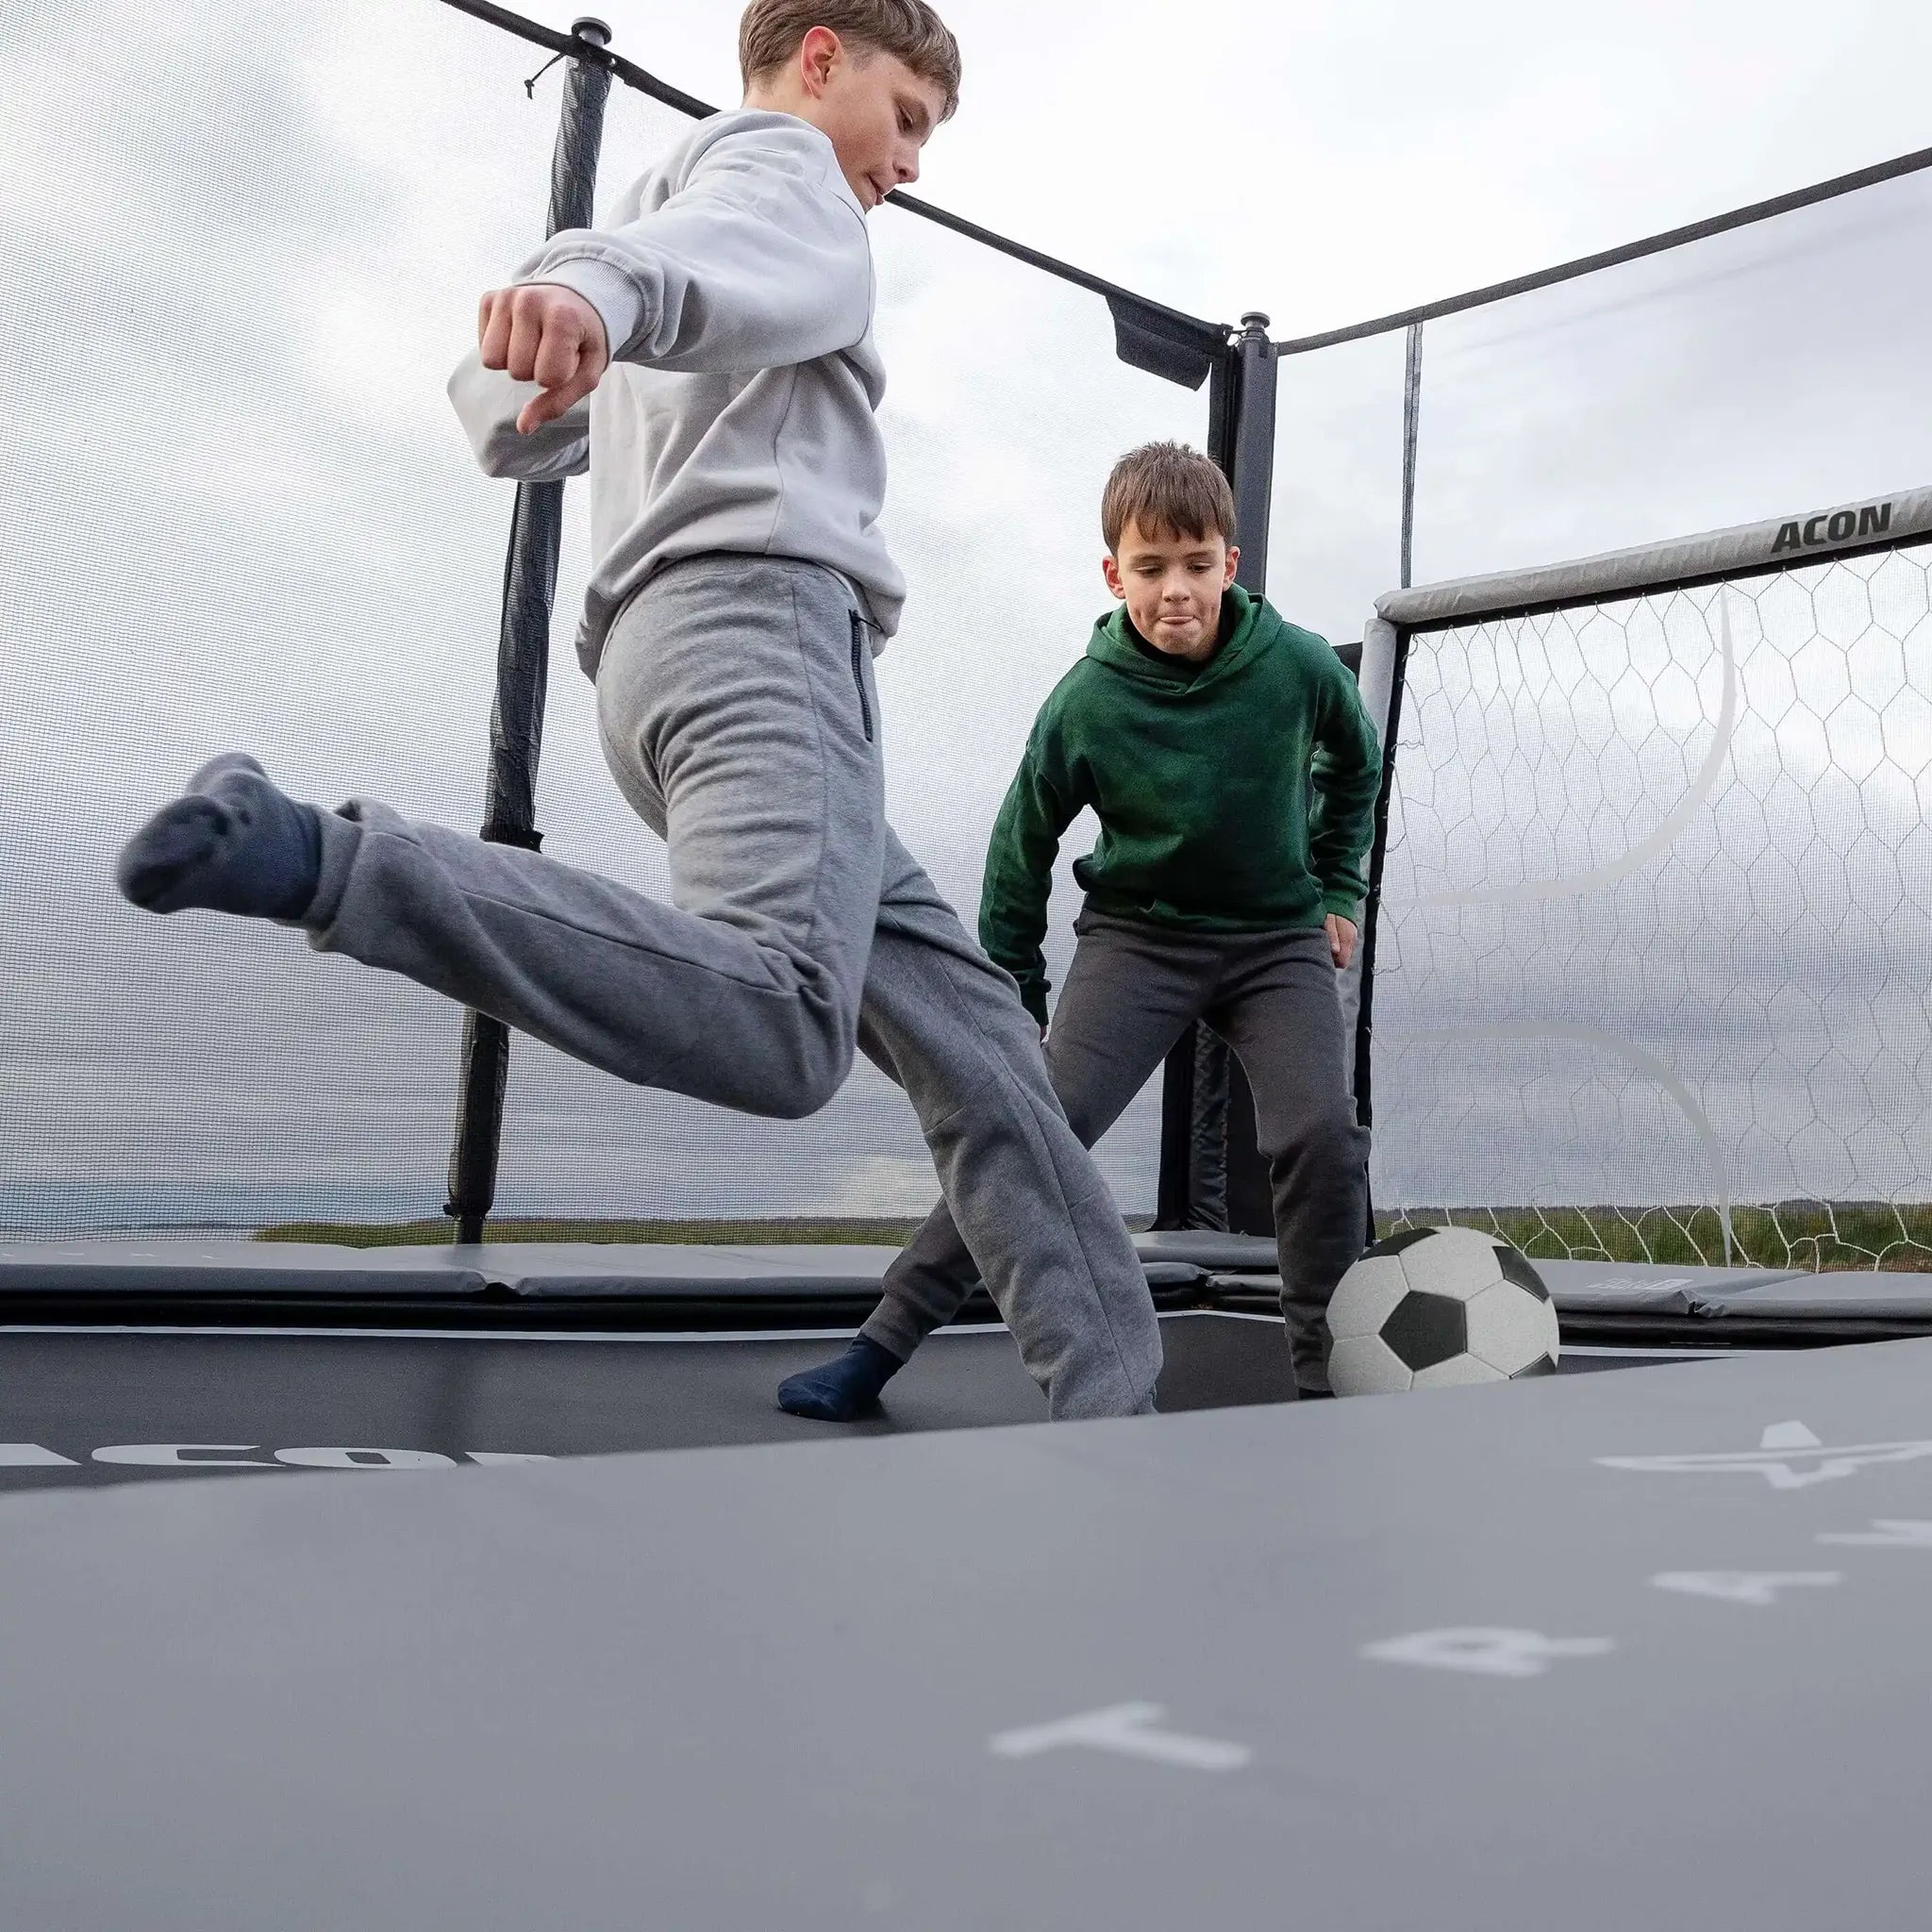 Two boys play trampoline soccer on the Acon X Trampoline.